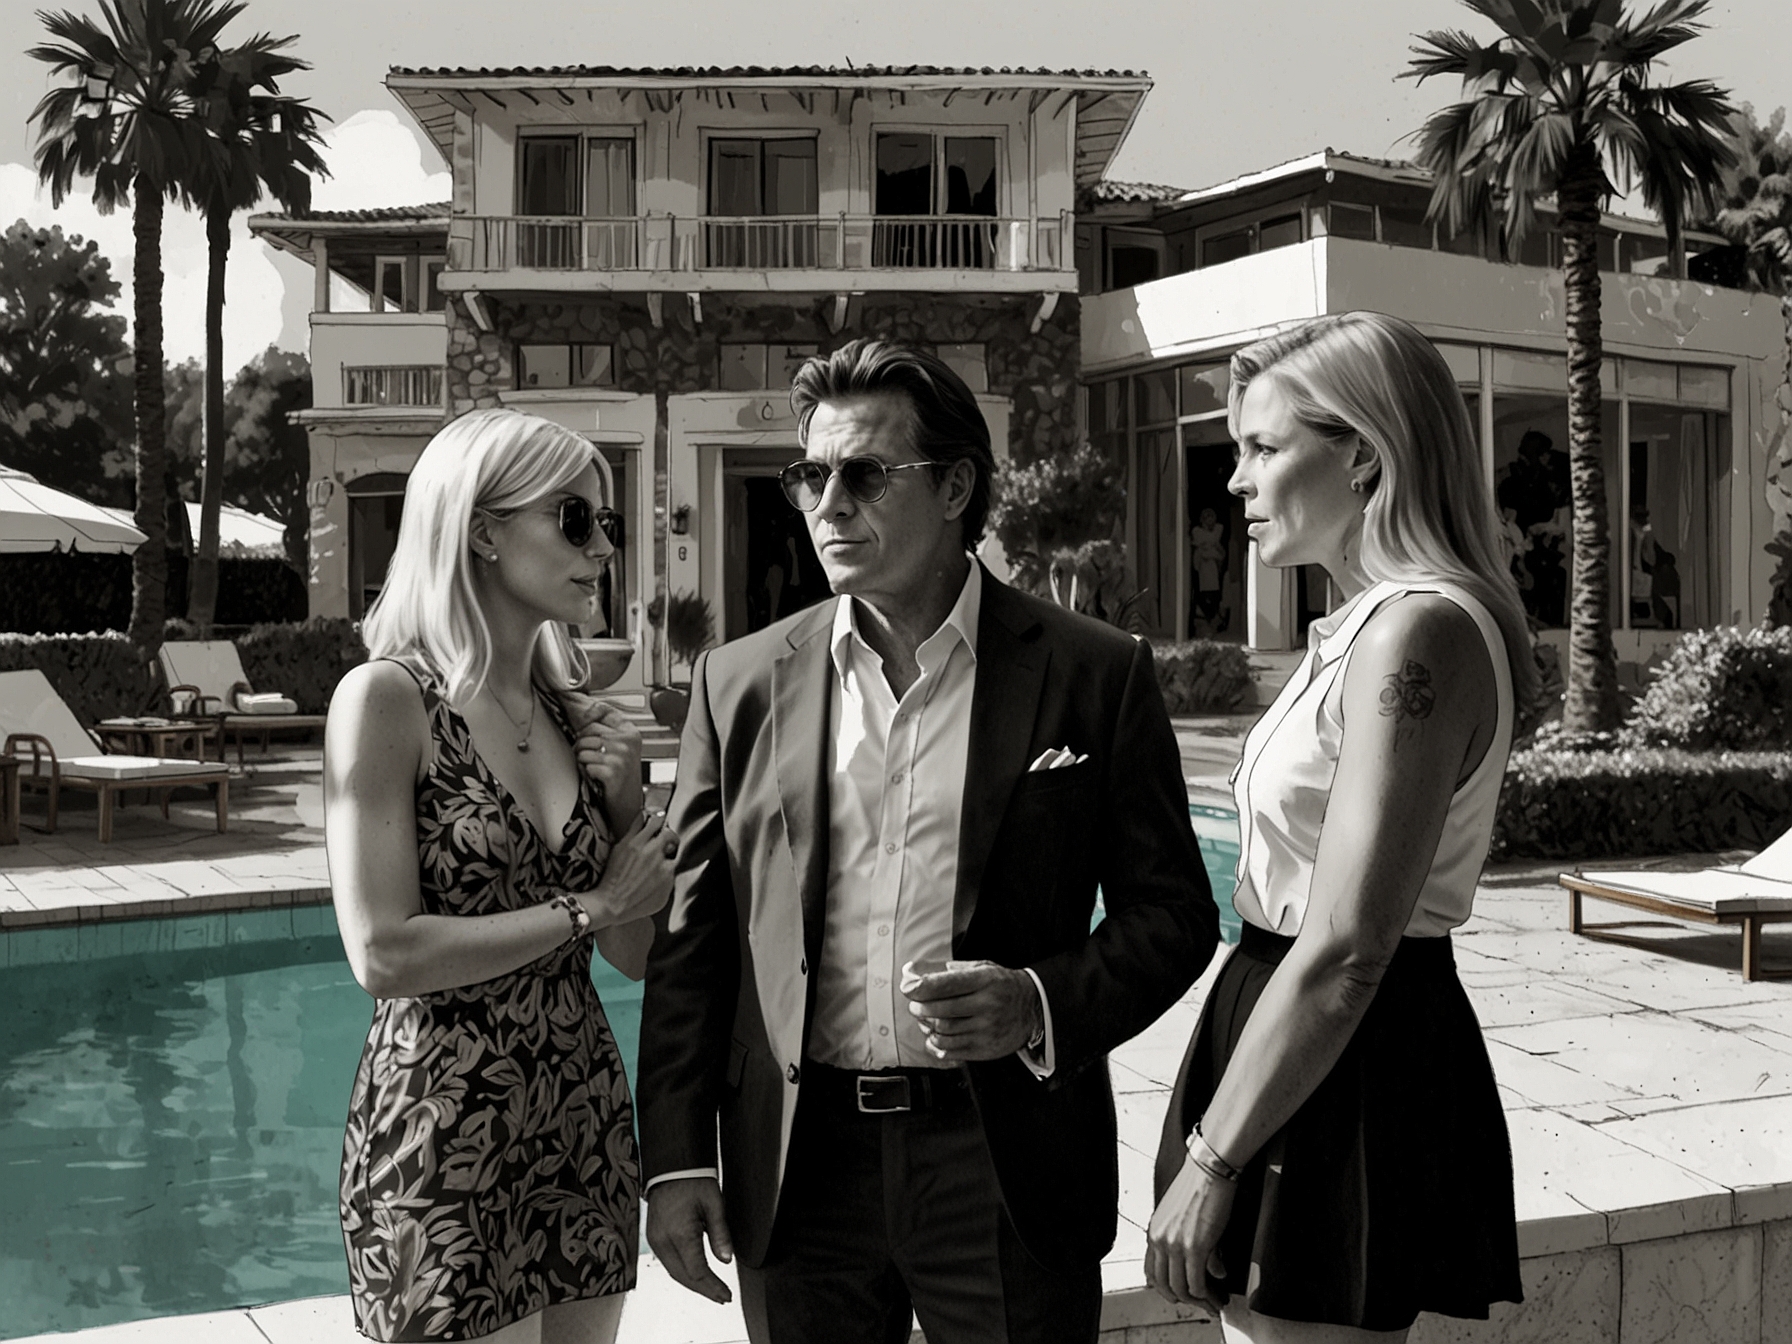 Ronnie stands in the middle, flanked by Jess on one side and Harriett on the other, as they have an intense conversation by the villa pool.